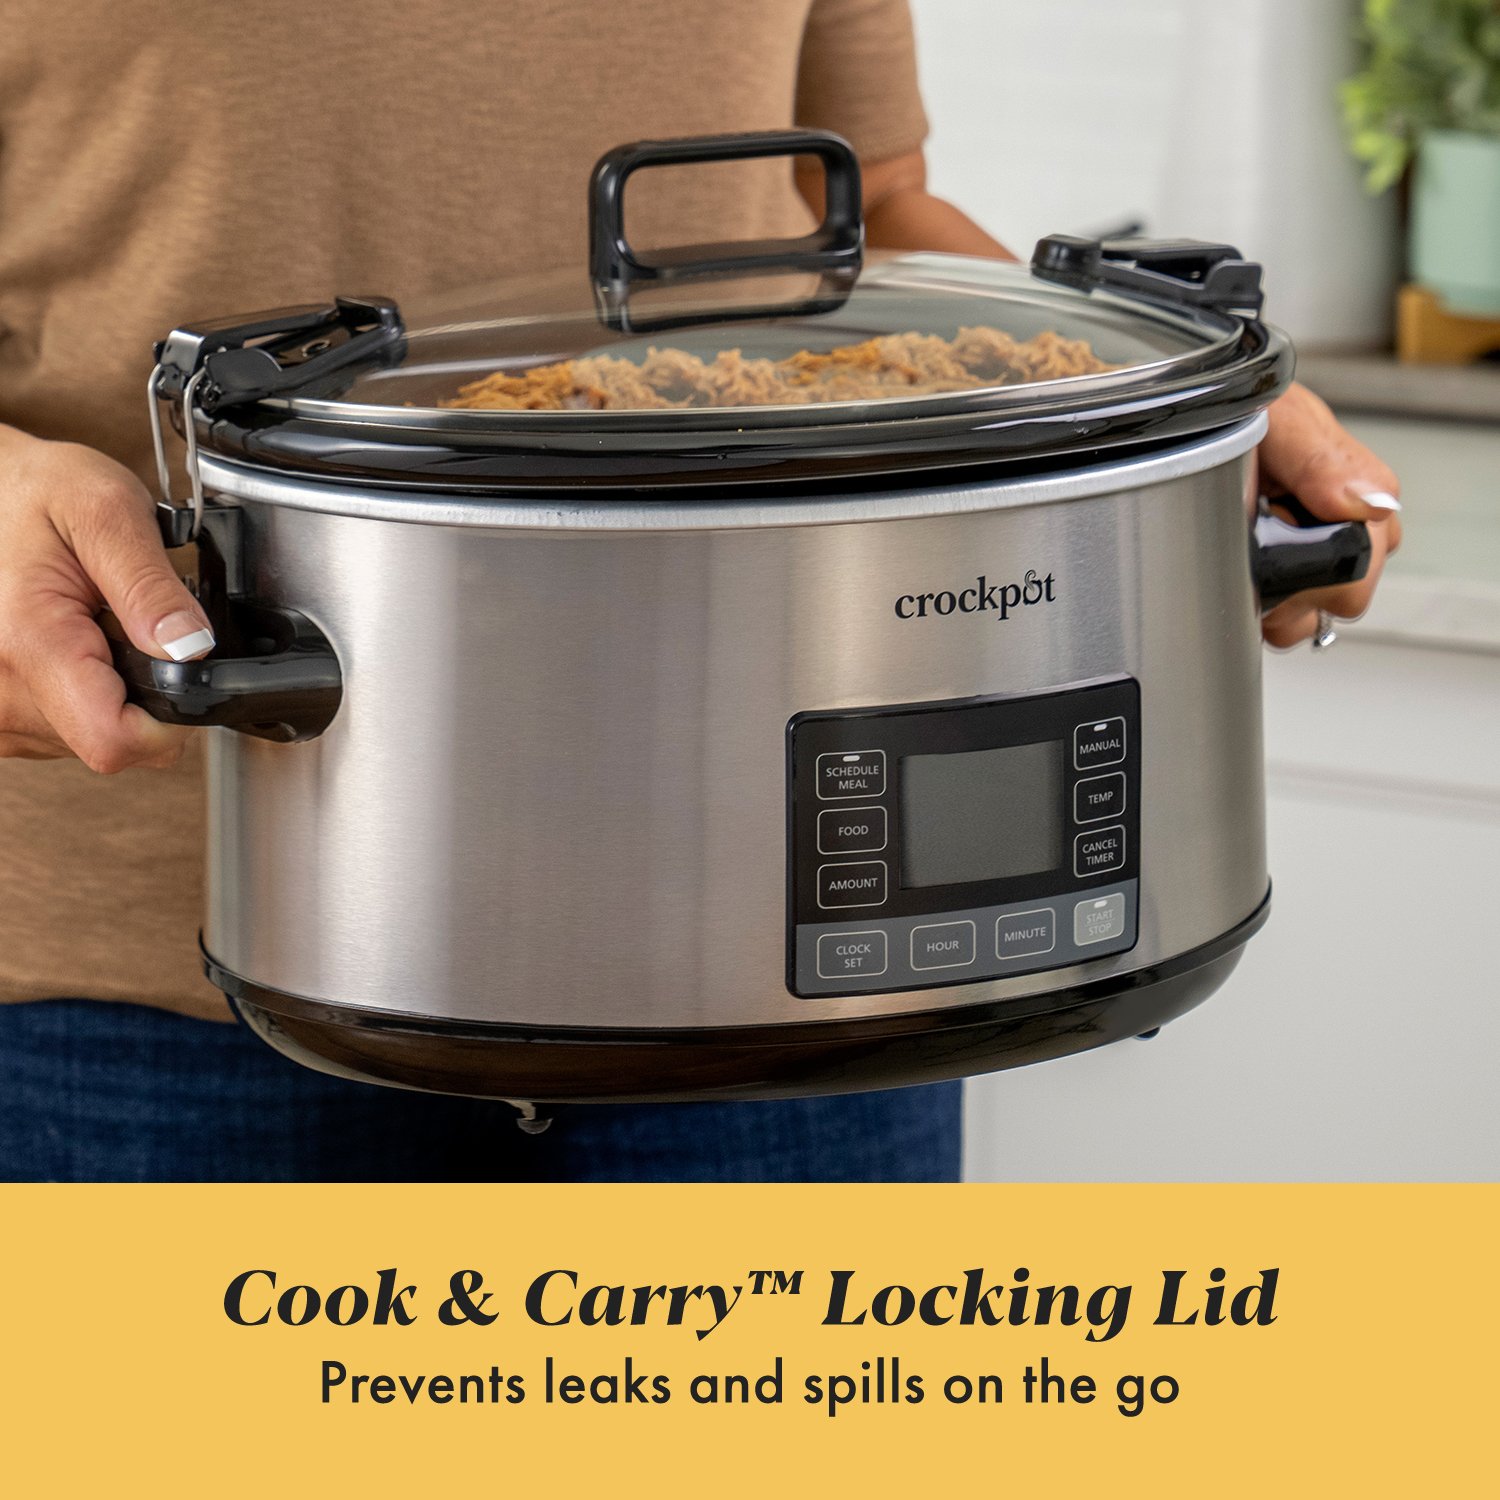 Crockpot 7Qt MyTime Cook and Carry Quick Review and Unboxing 